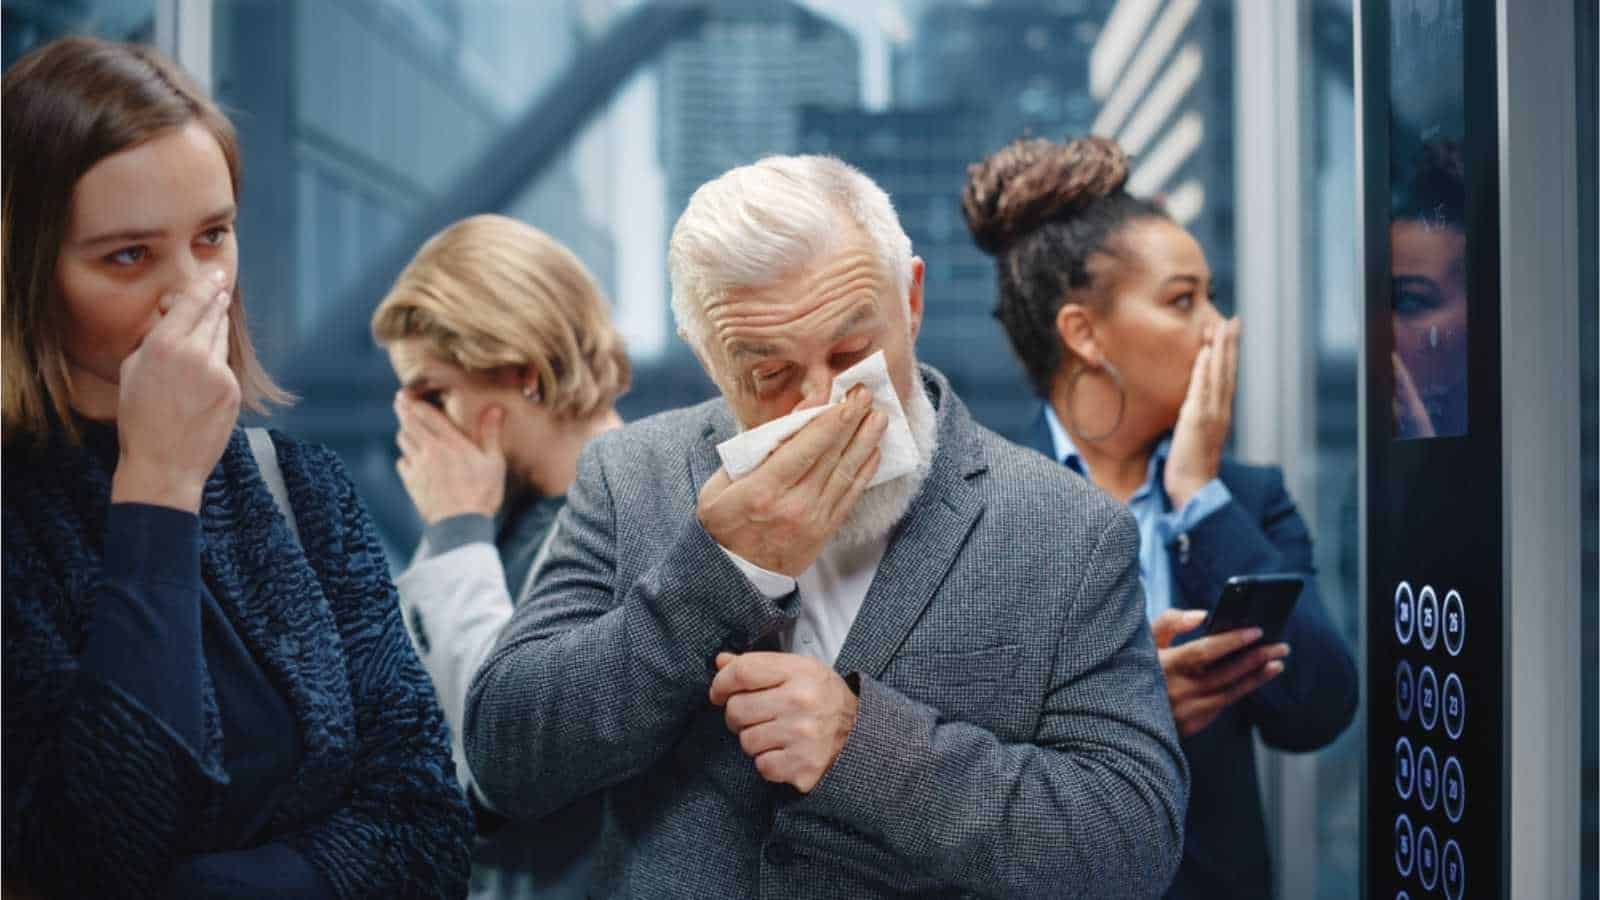 Middle Aged Man Sneezes in a Crowded Glass Elevator in a Modern Office Building. Businessman Covers His Face, but Other People Are Afraid to Catch the Virus and Microbes in a Lift.